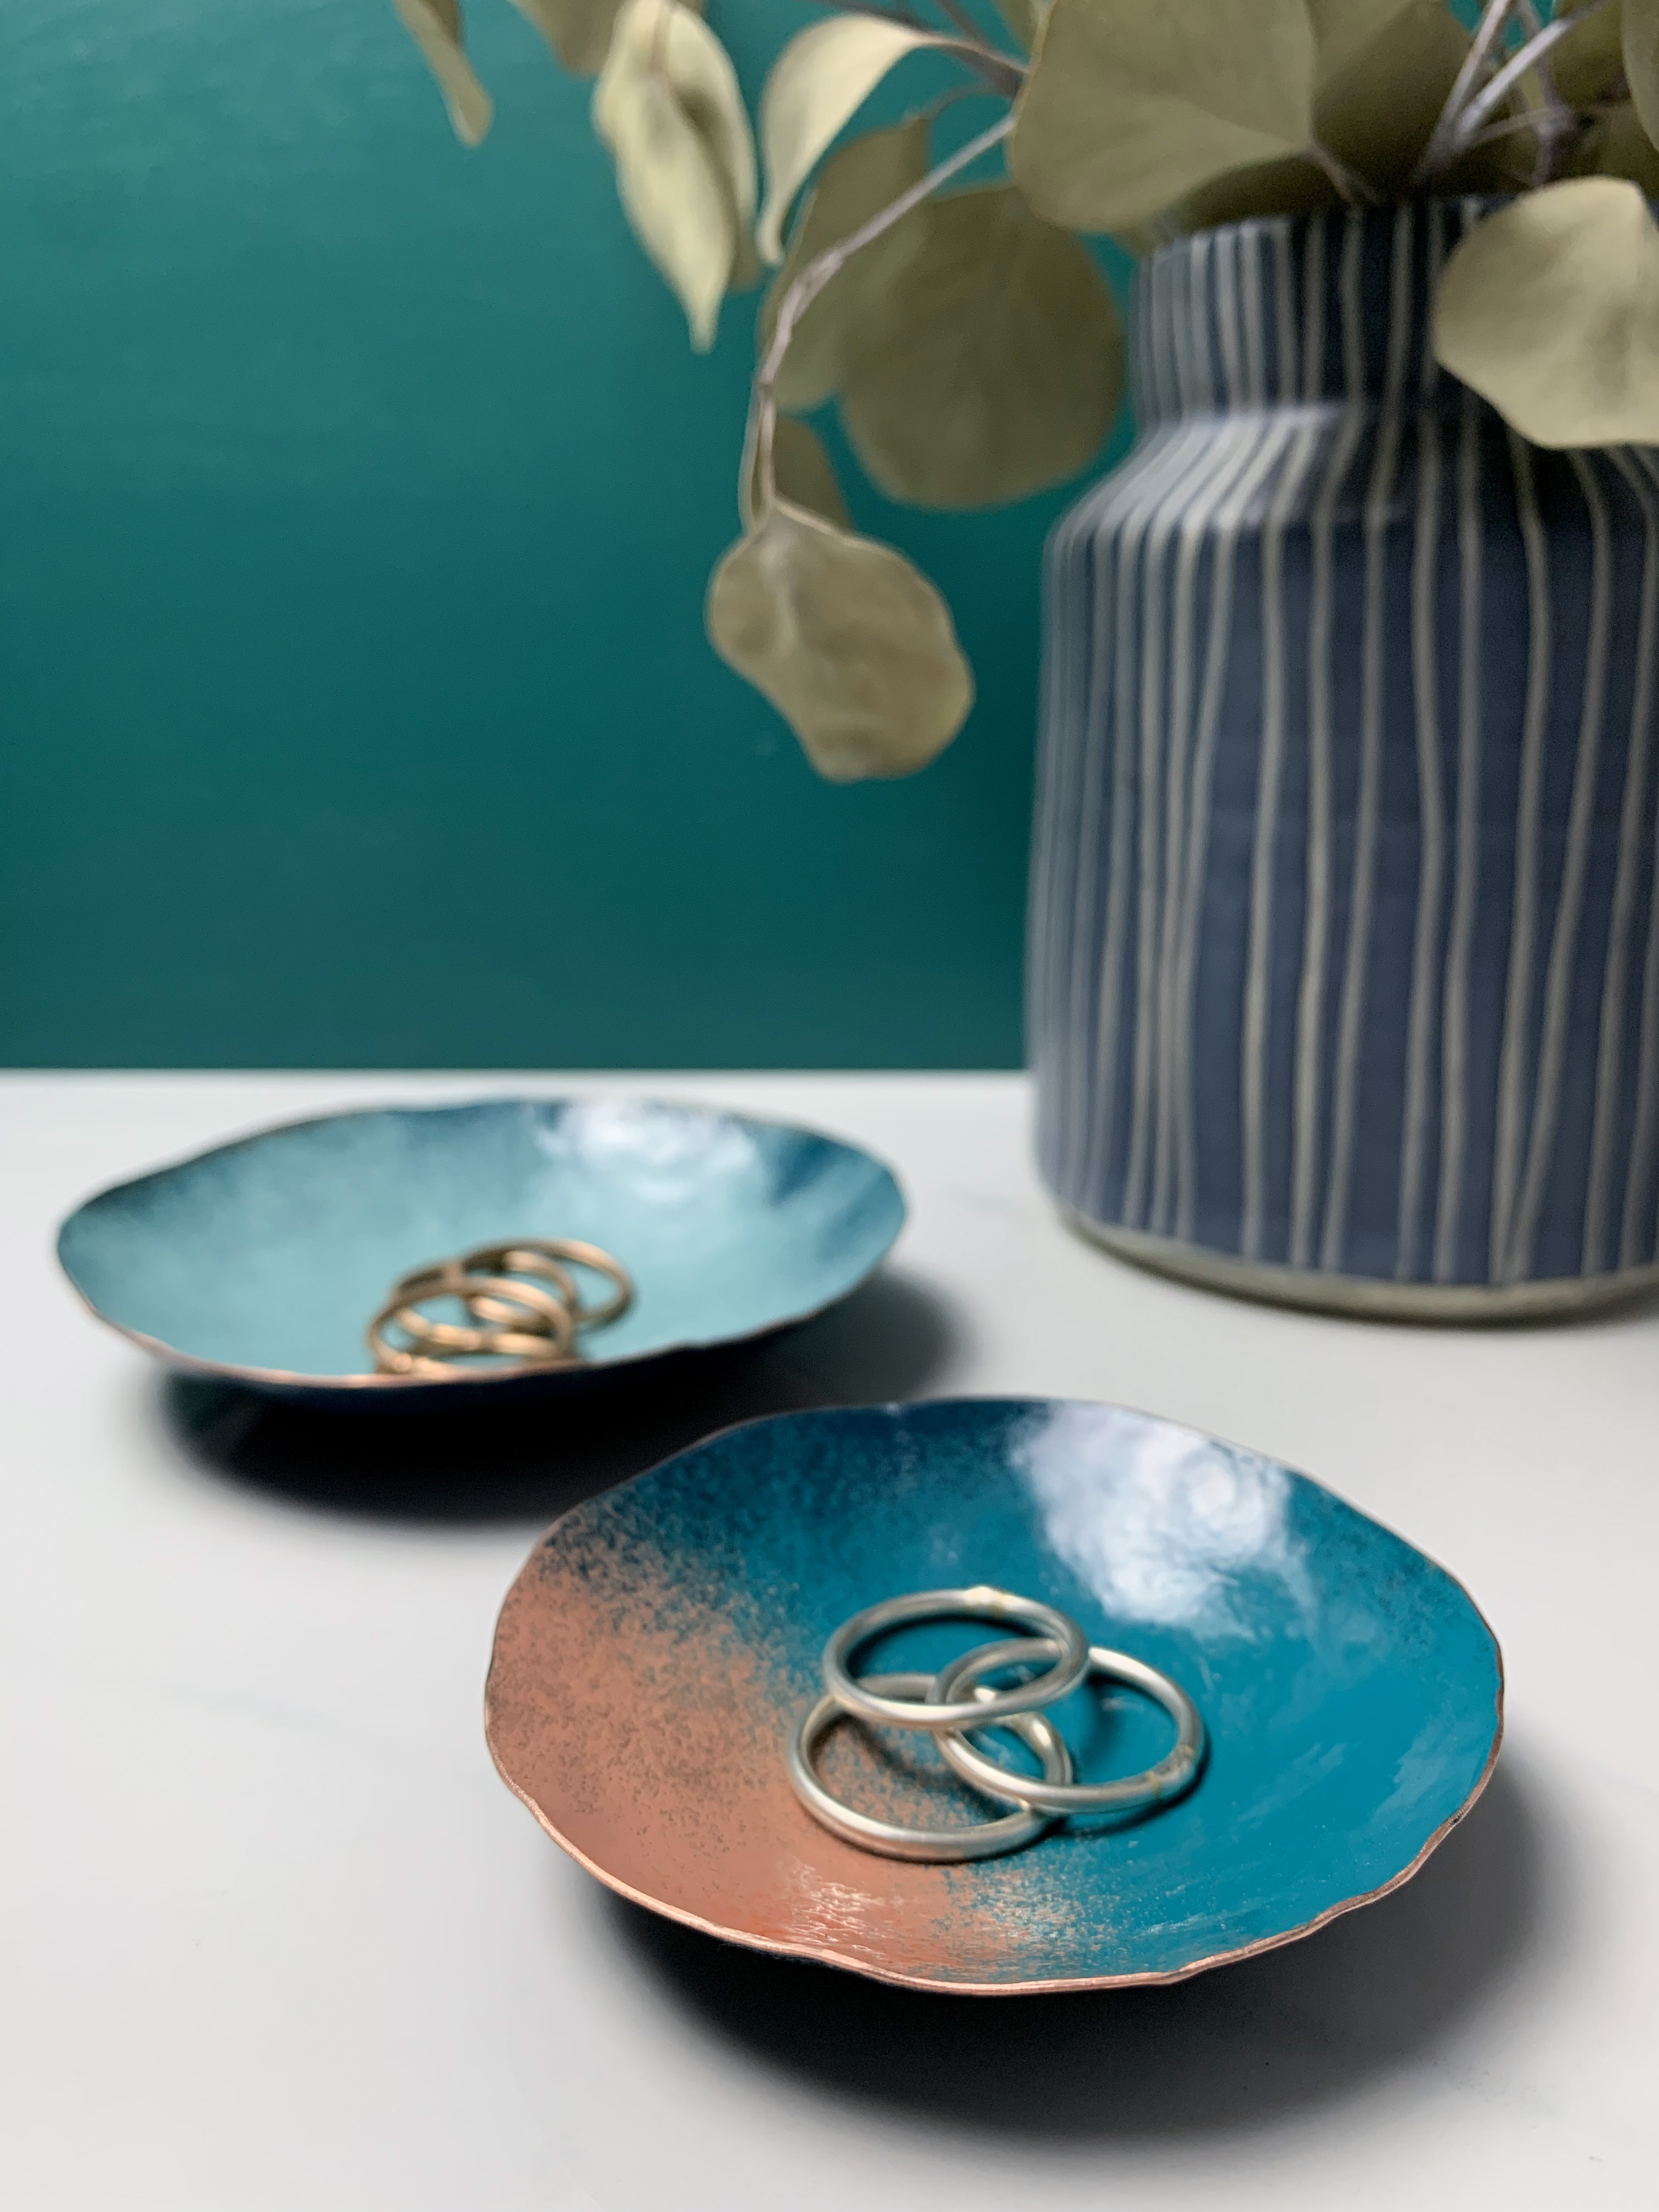 vanity countertop decor with dark teal walls: decorative metal ring dishes and vase with eucalyptus 